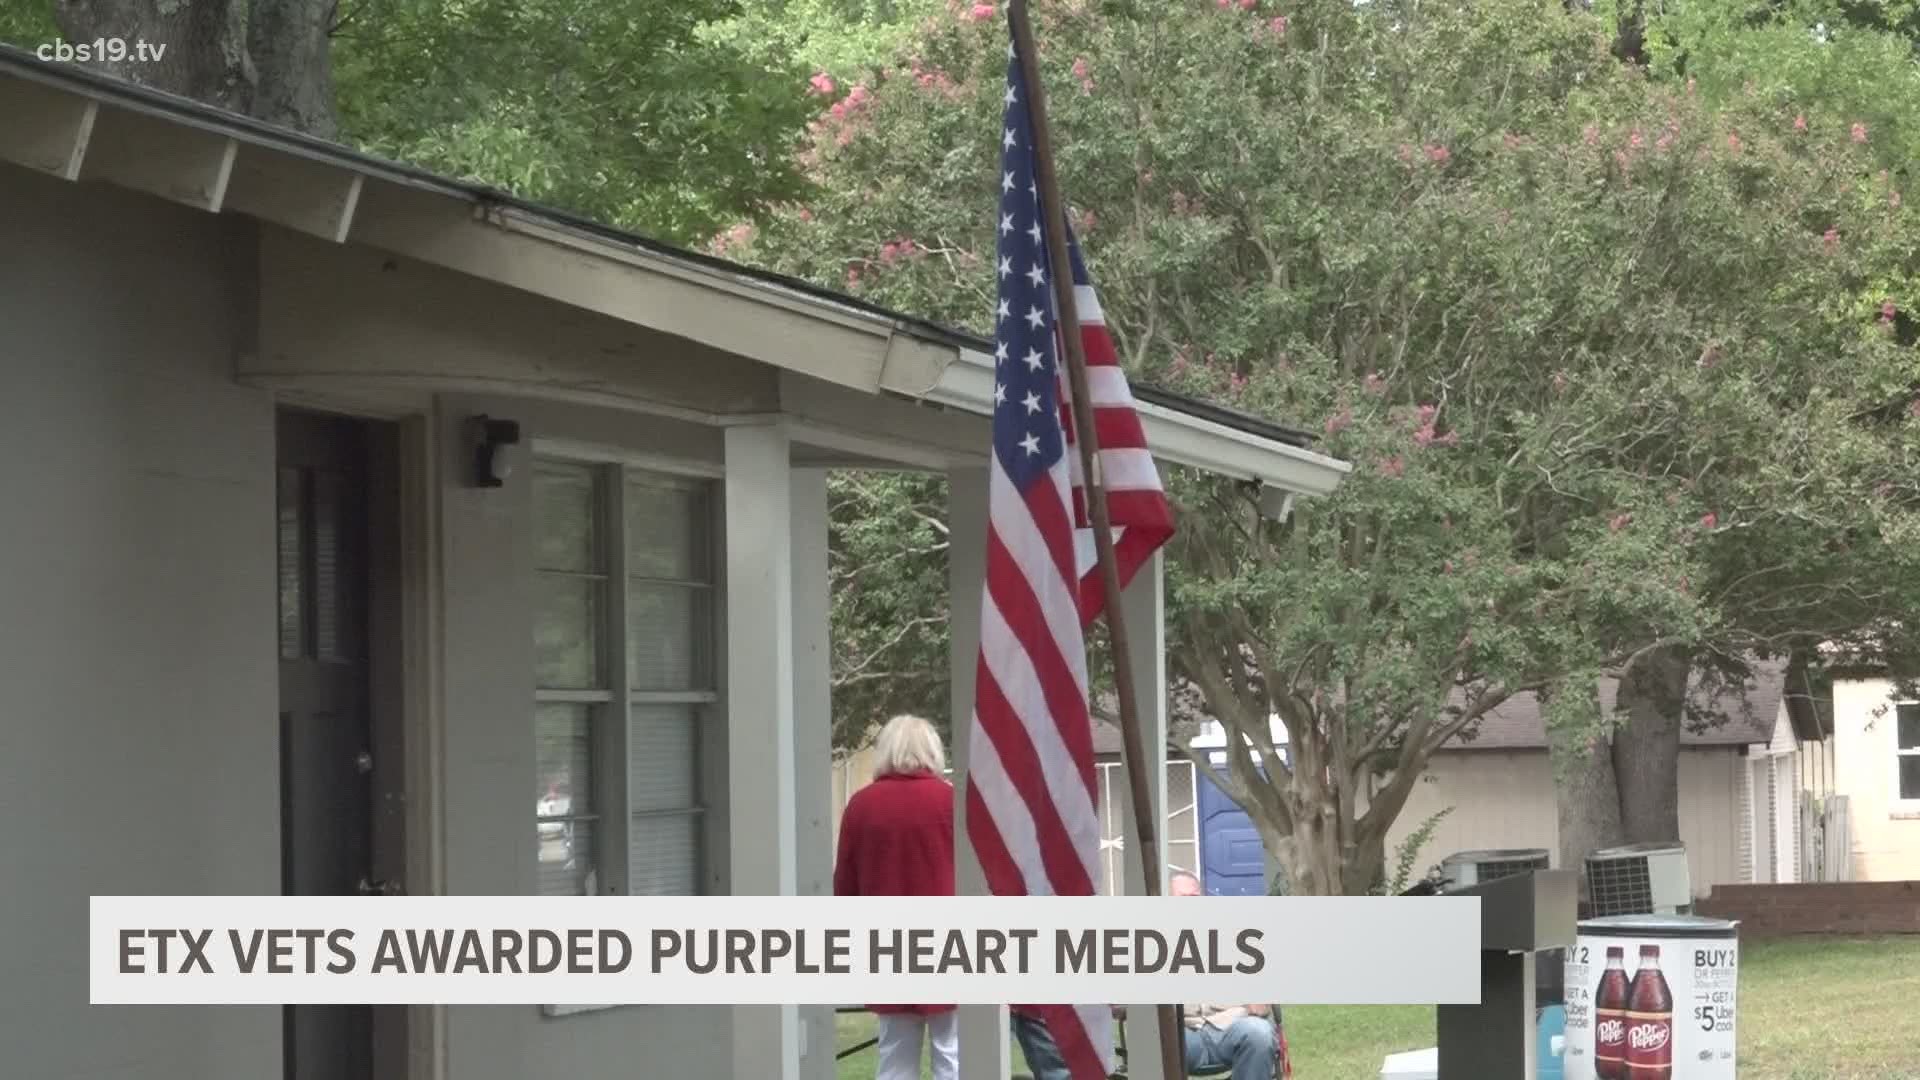 A few East Texas vets were awarded purple heart medals at a ceremony at CampV Friday morning.